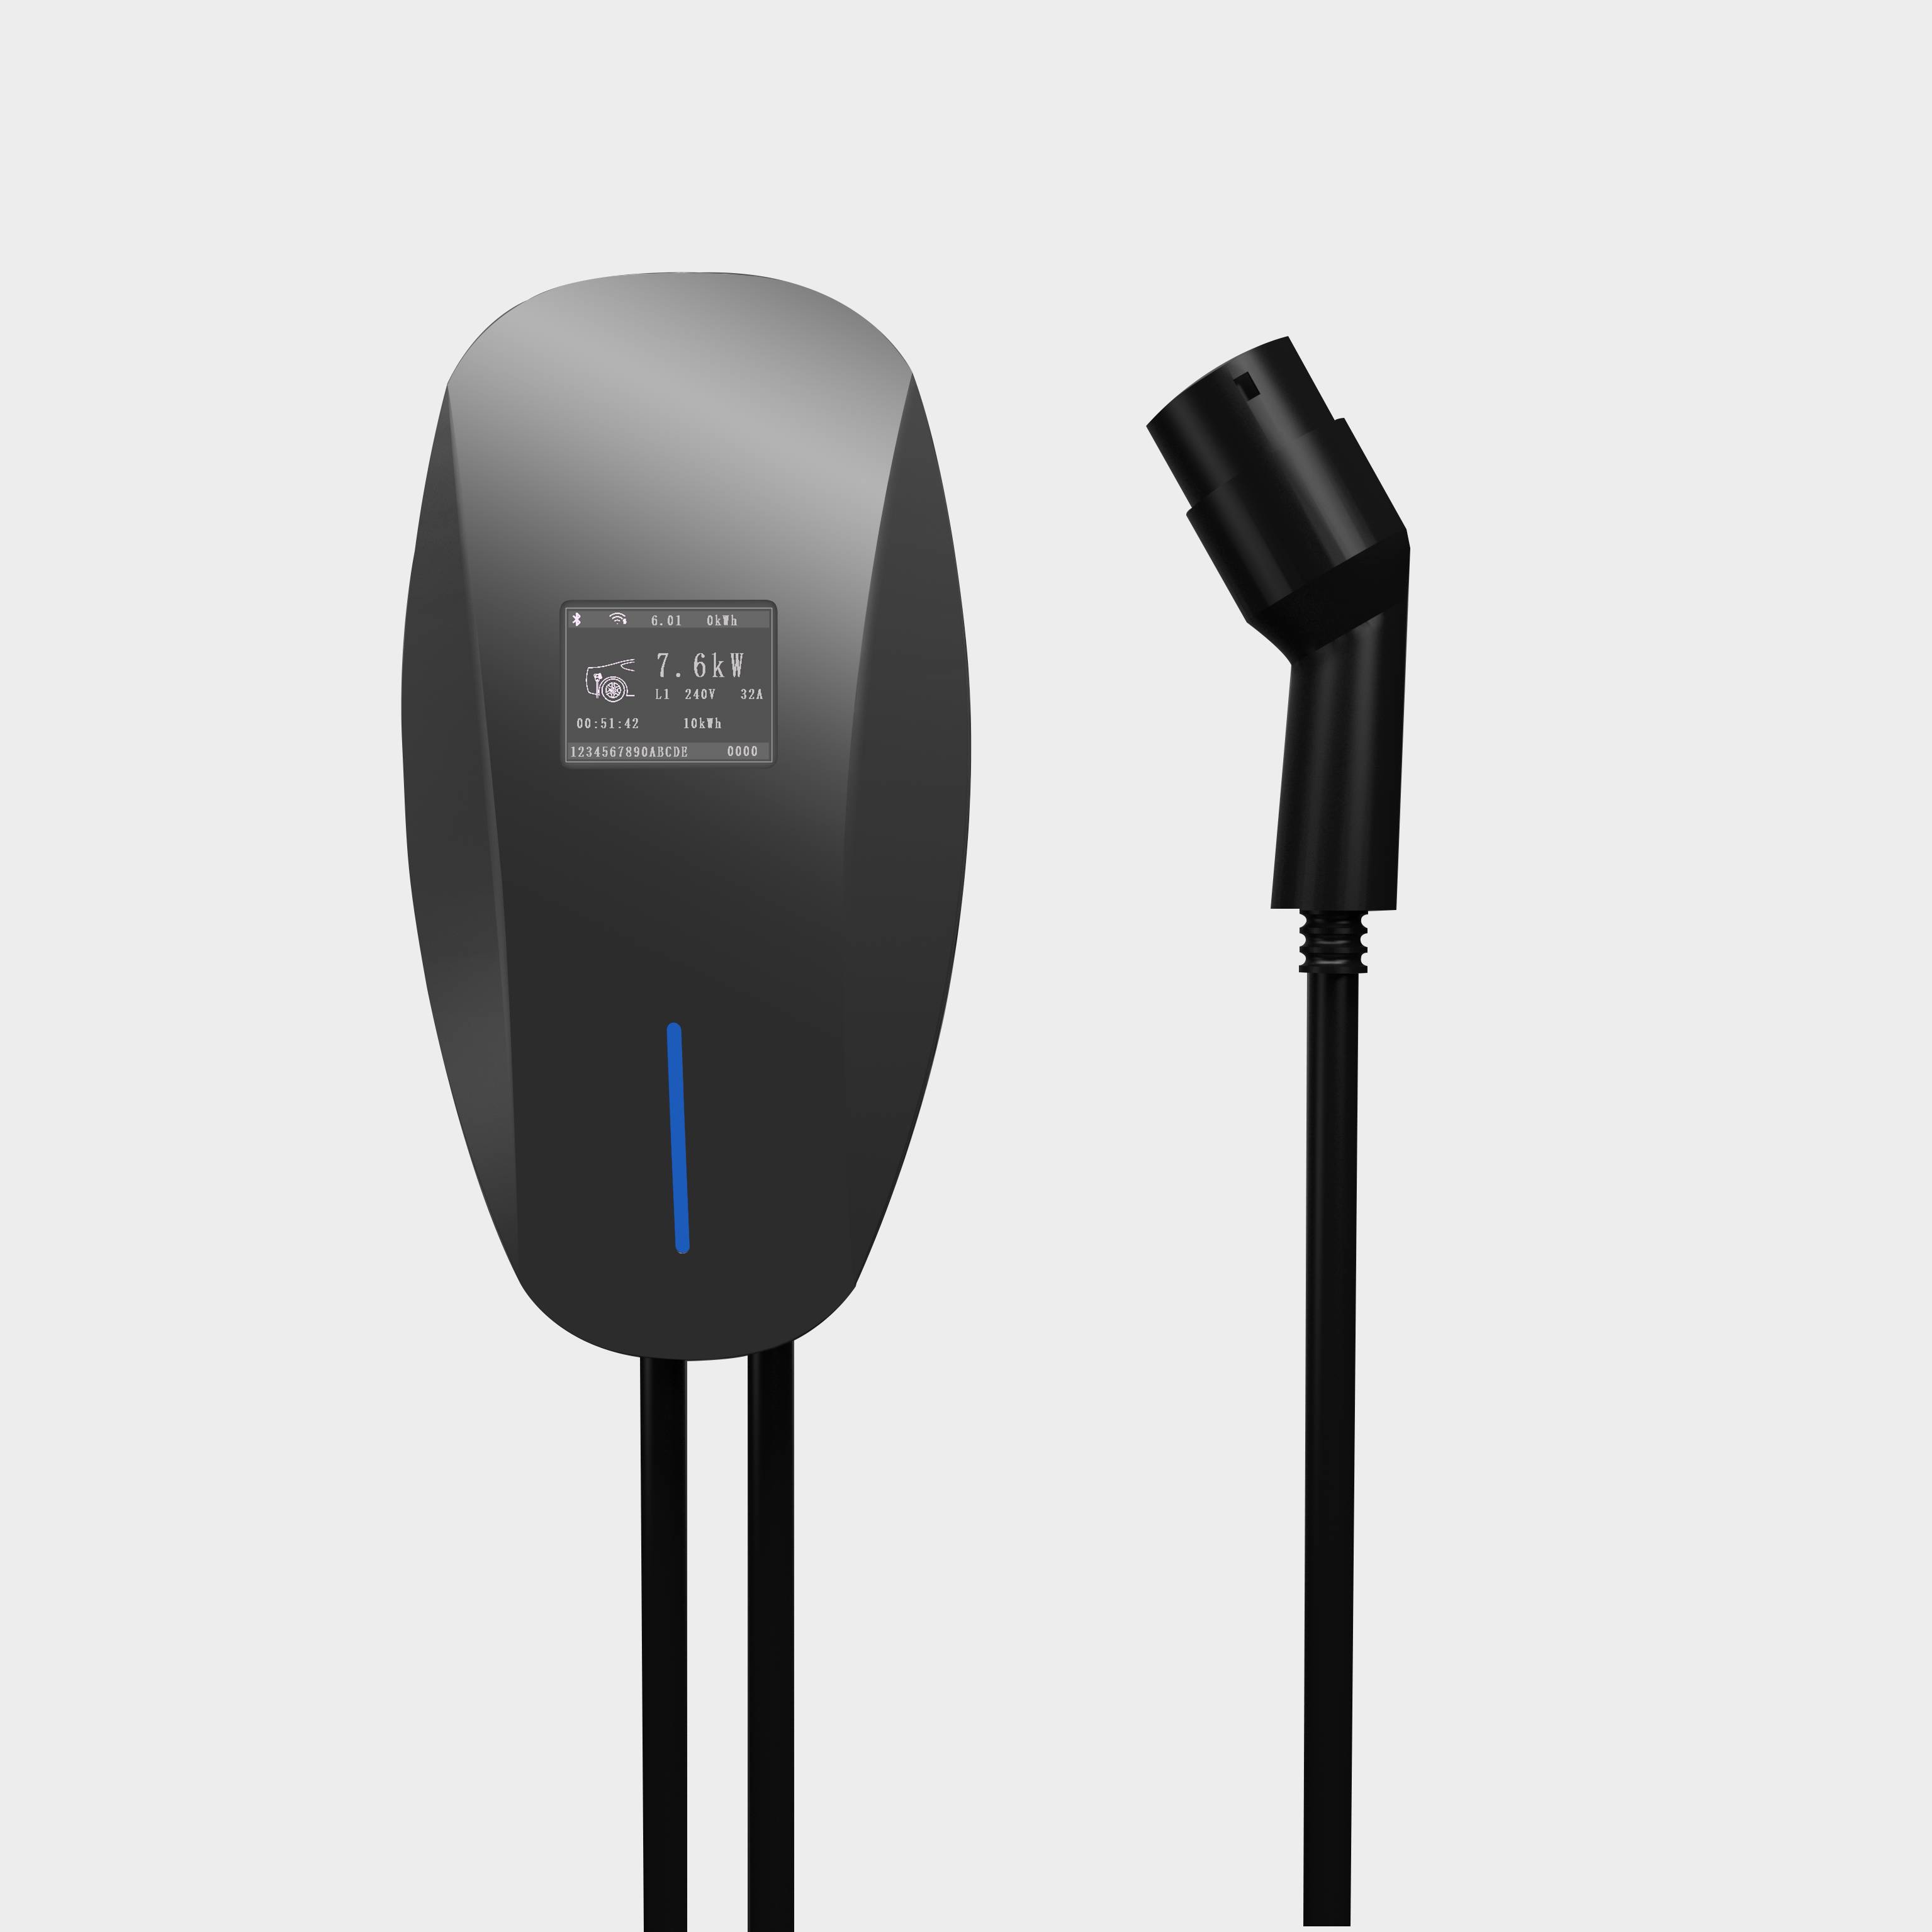 https://www.wyevcharger.com/ac-ev-charging-stations-hm-series-product/